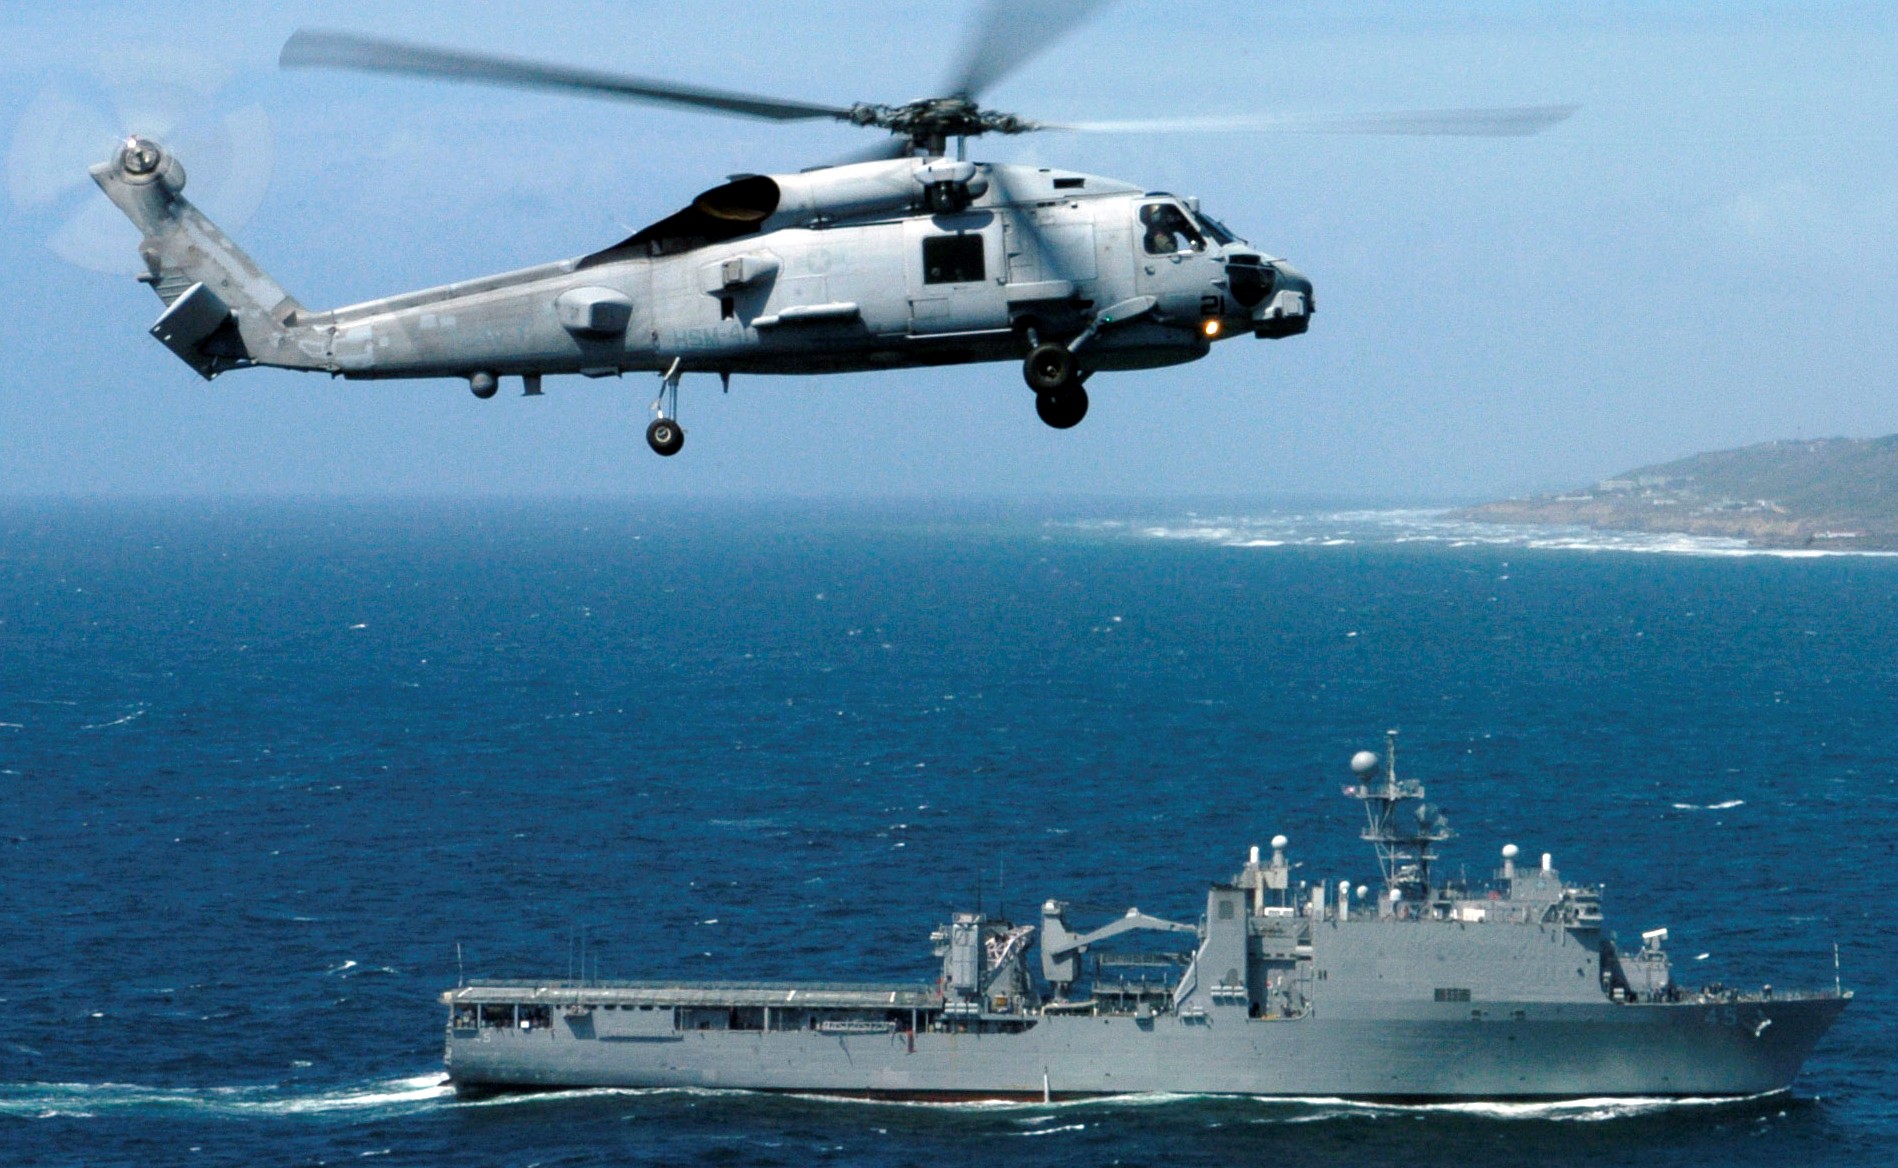 hsm-41 seahawks helicopter maritime strike squadron mh-60r fleet replacement navy 2006 12